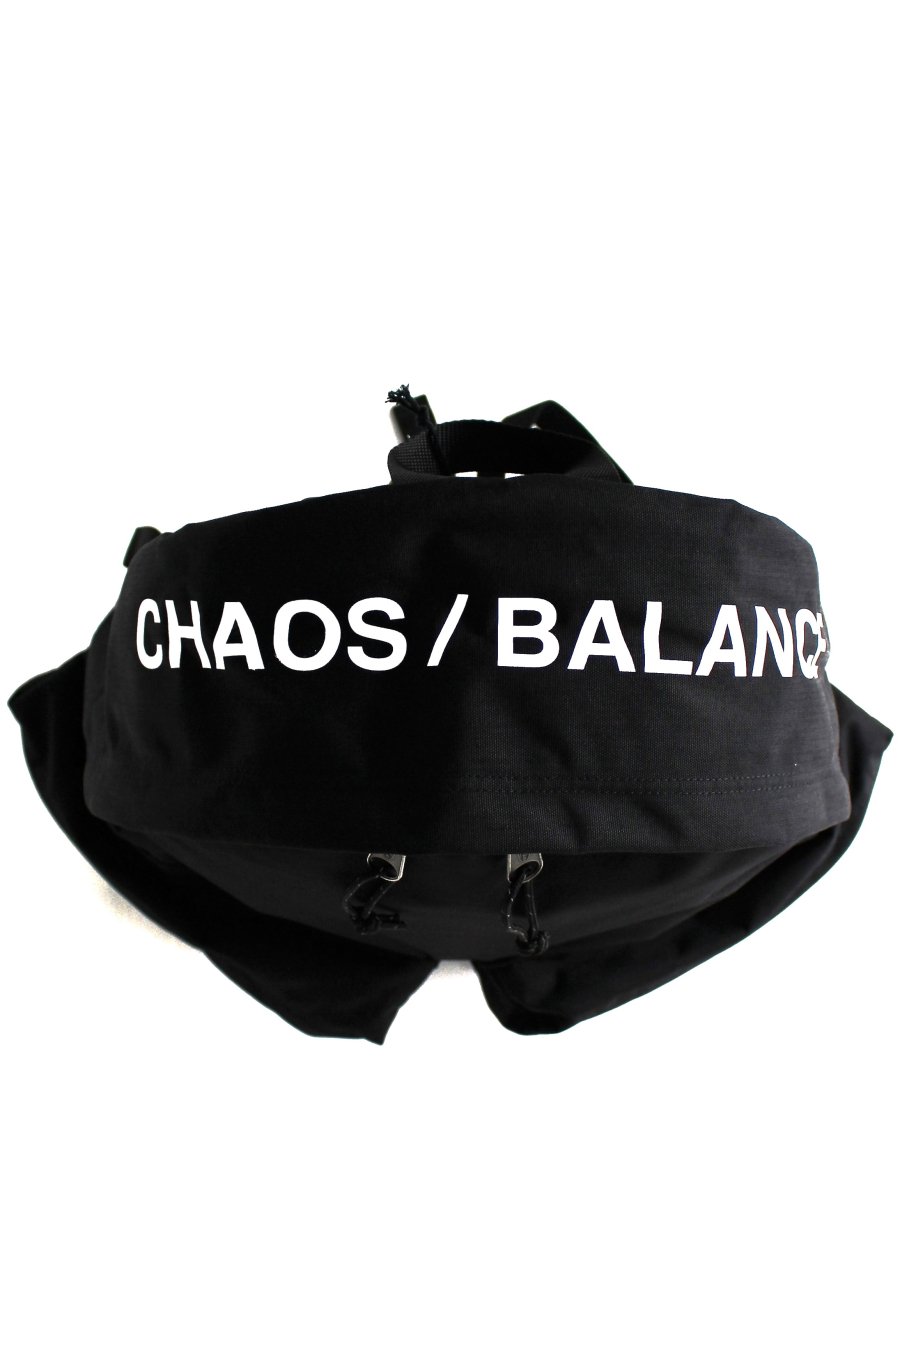 UNDERCOVER　20AW　トートバッグ　CHAOS BALANCE　黒